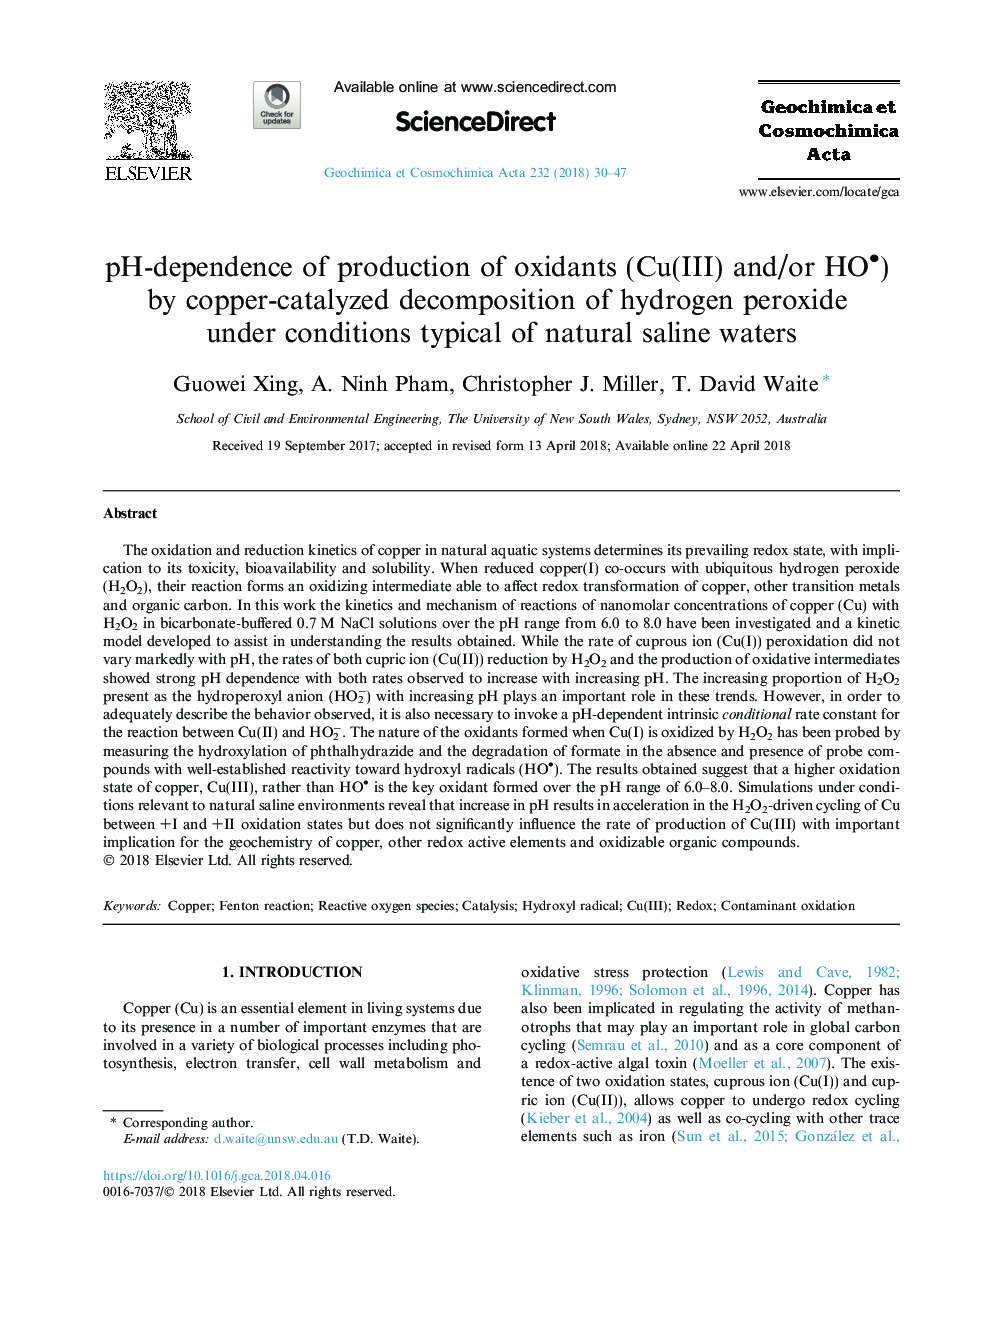 pH-dependence of production of oxidants (Cu(III) and/or HOâ¢) by copper-catalyzed decomposition of hydrogen peroxide under conditions typical of natural saline waters